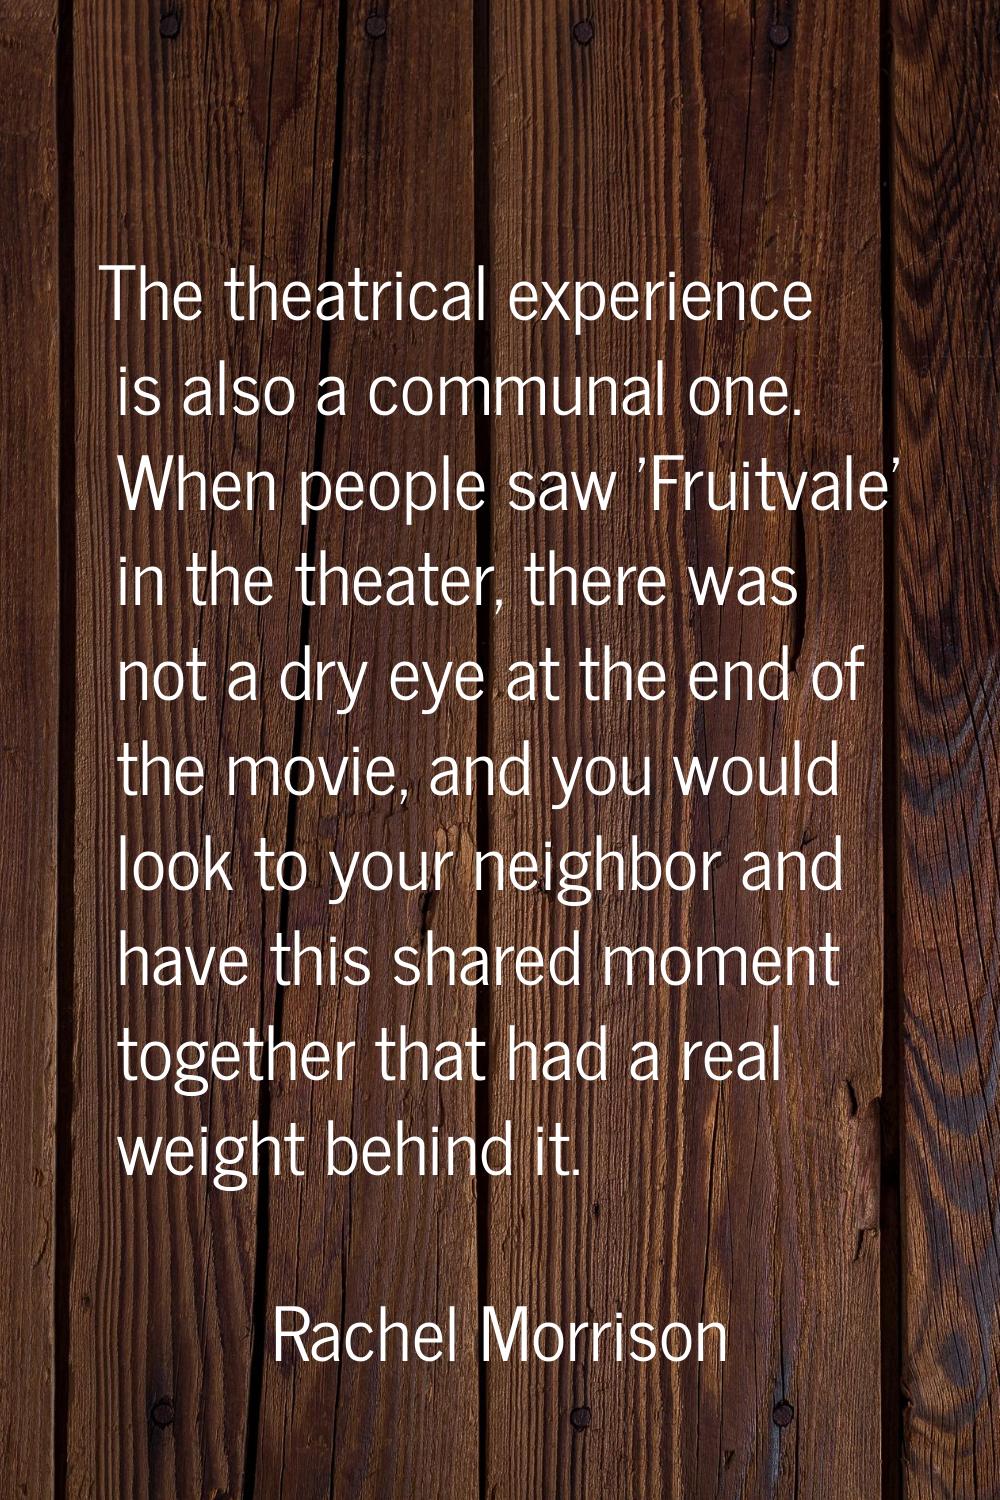 The theatrical experience is also a communal one. When people saw 'Fruitvale' in the theater, there